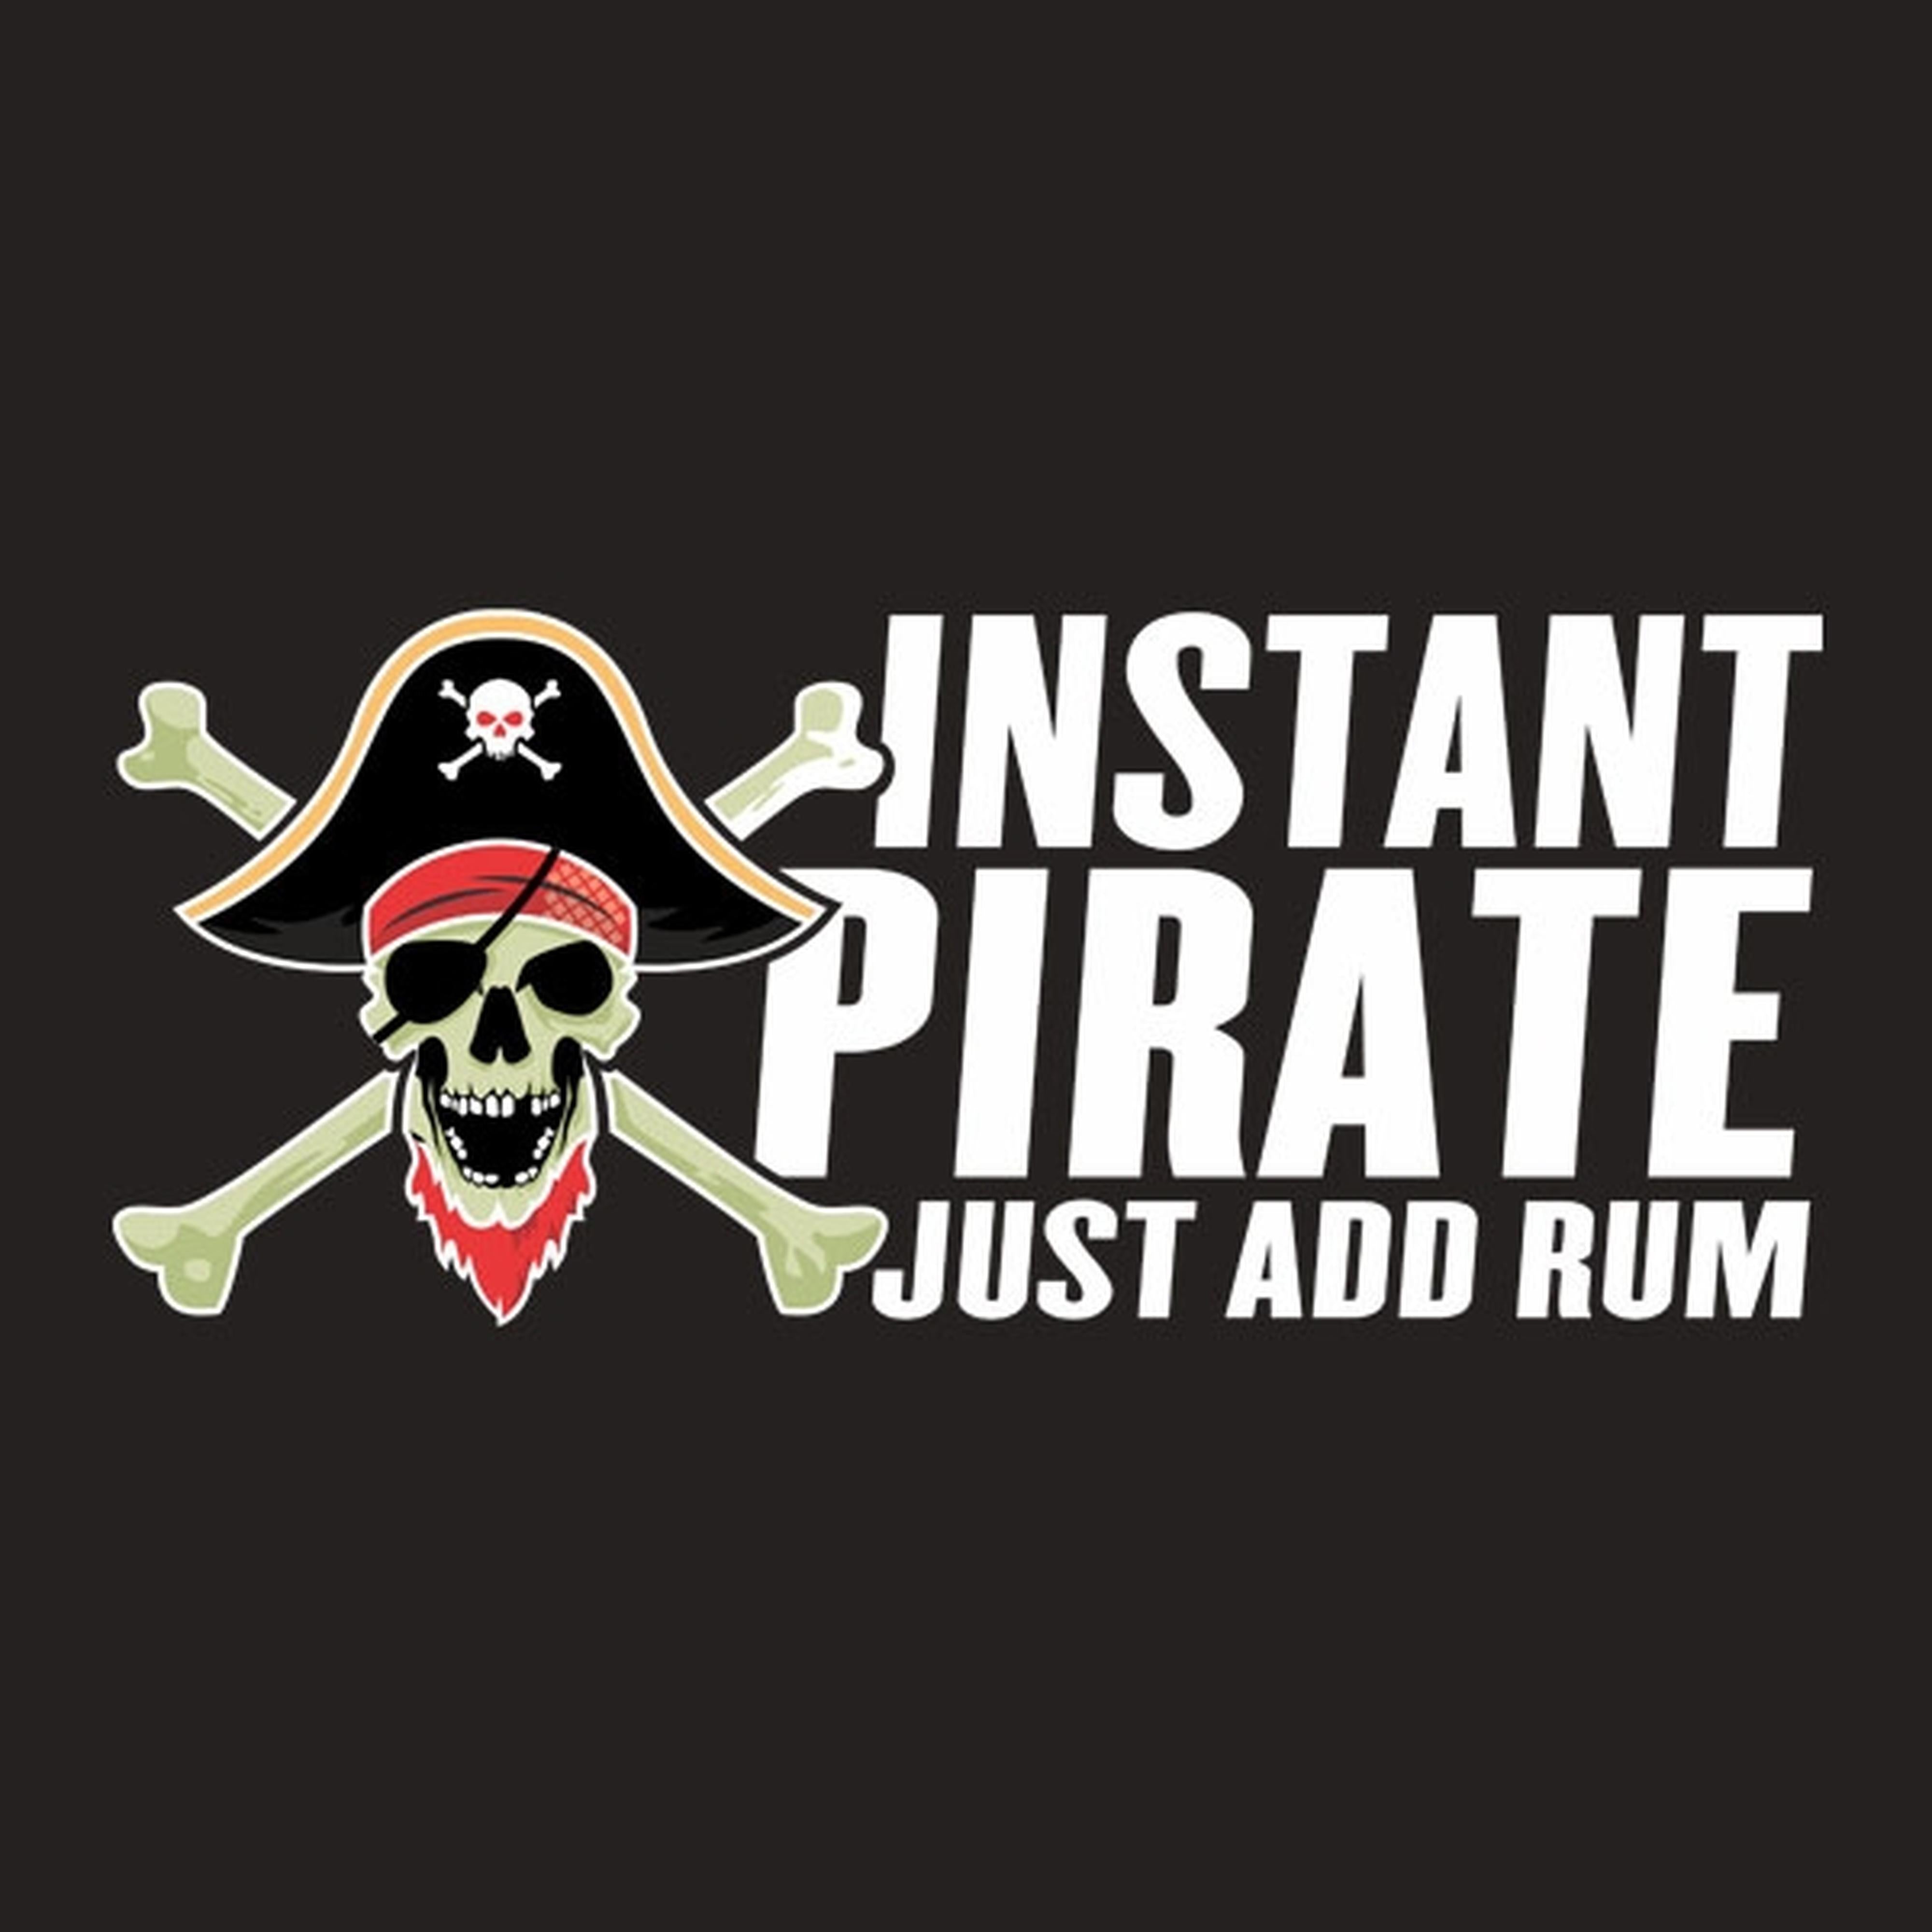 Instant pirate - T-shirt